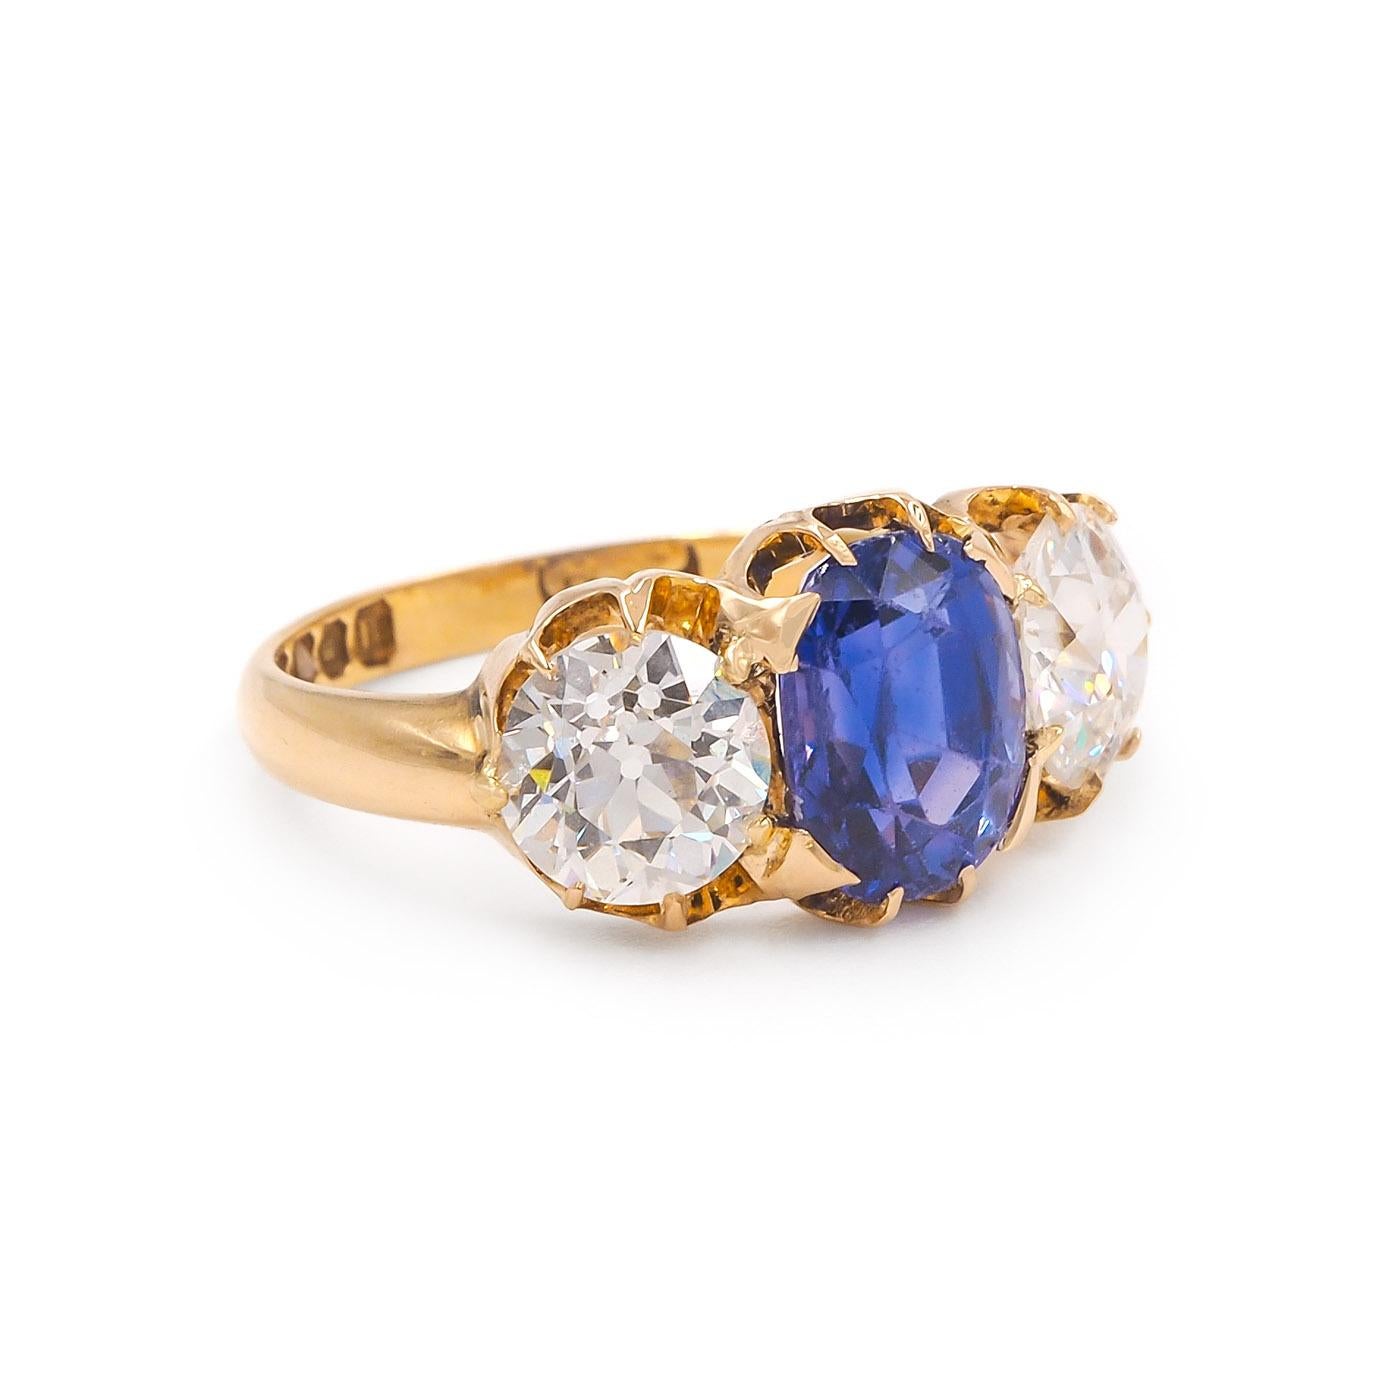 English Origin Edwardian era 2.75 Carat Oval Cut Sapphire & 2.14 Ctw. Old European Cut Diamond 3-Stone Ring, composed of 18k yellow gold. The center 2.75 carat Oval Cut blue sapphire is AGL certified, Ceylon origin and with No Evidence Of Heat